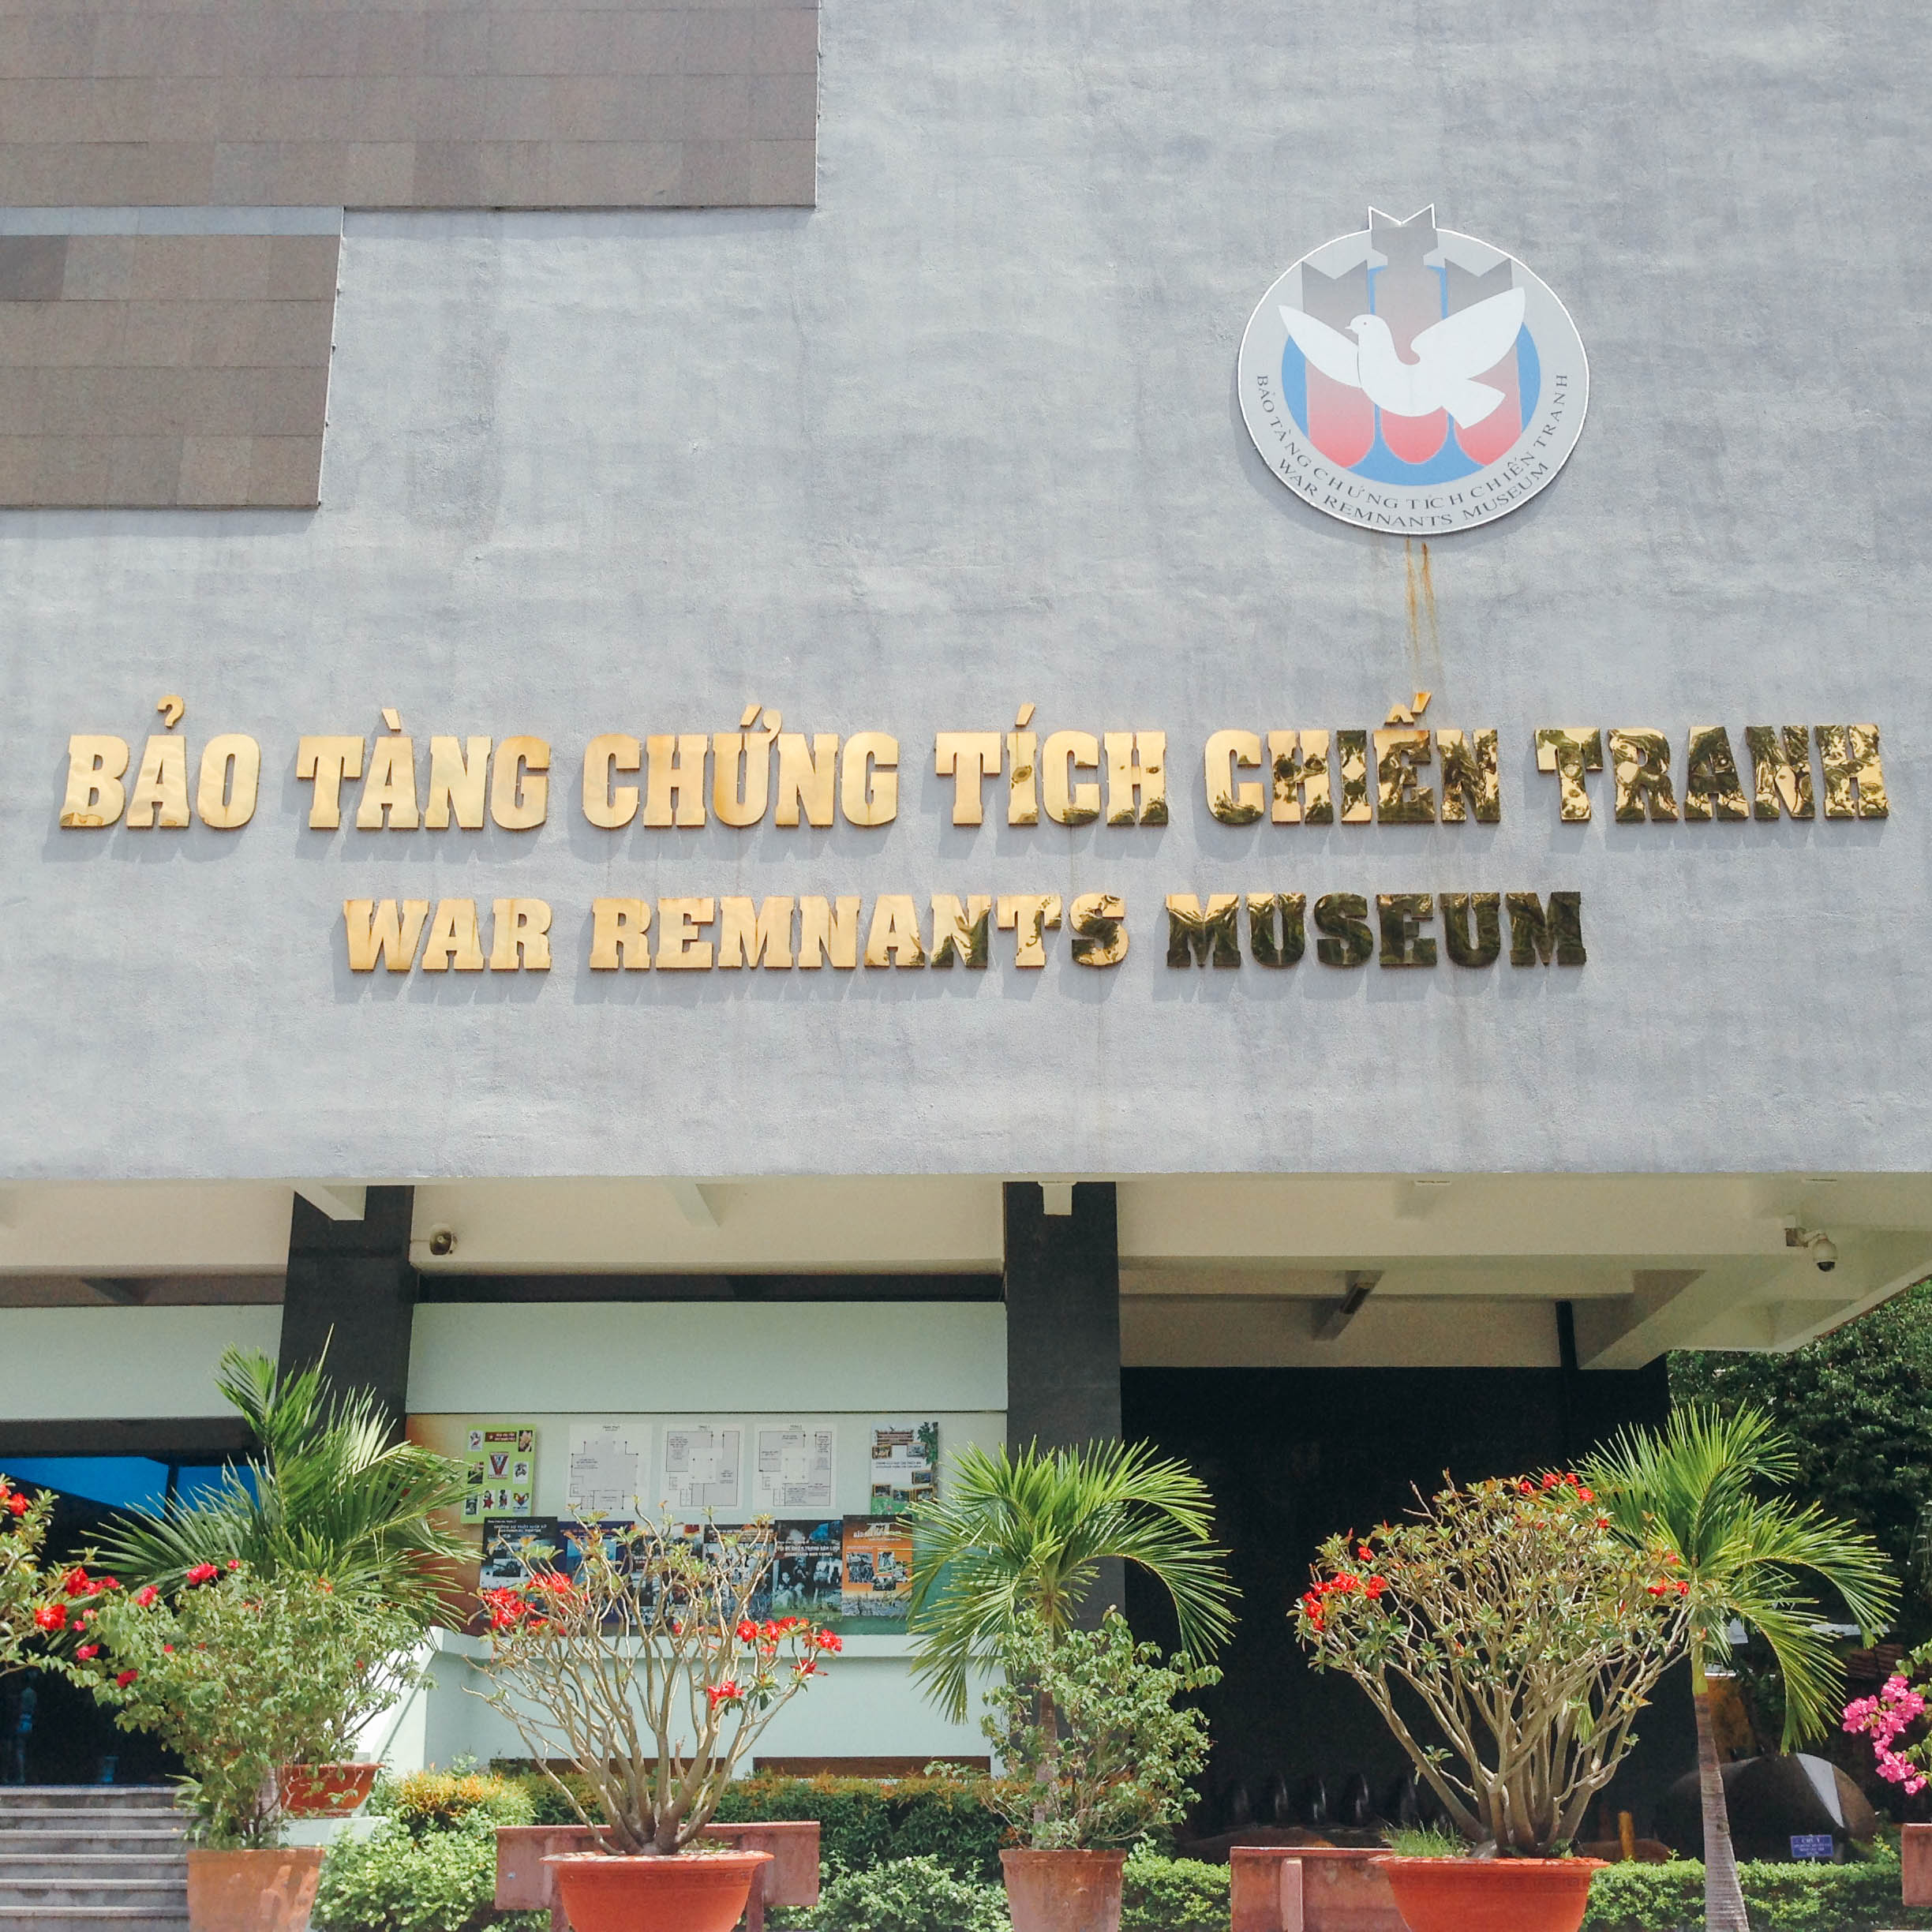 War Remnants Museum. Photo provided by Andrea Javier 